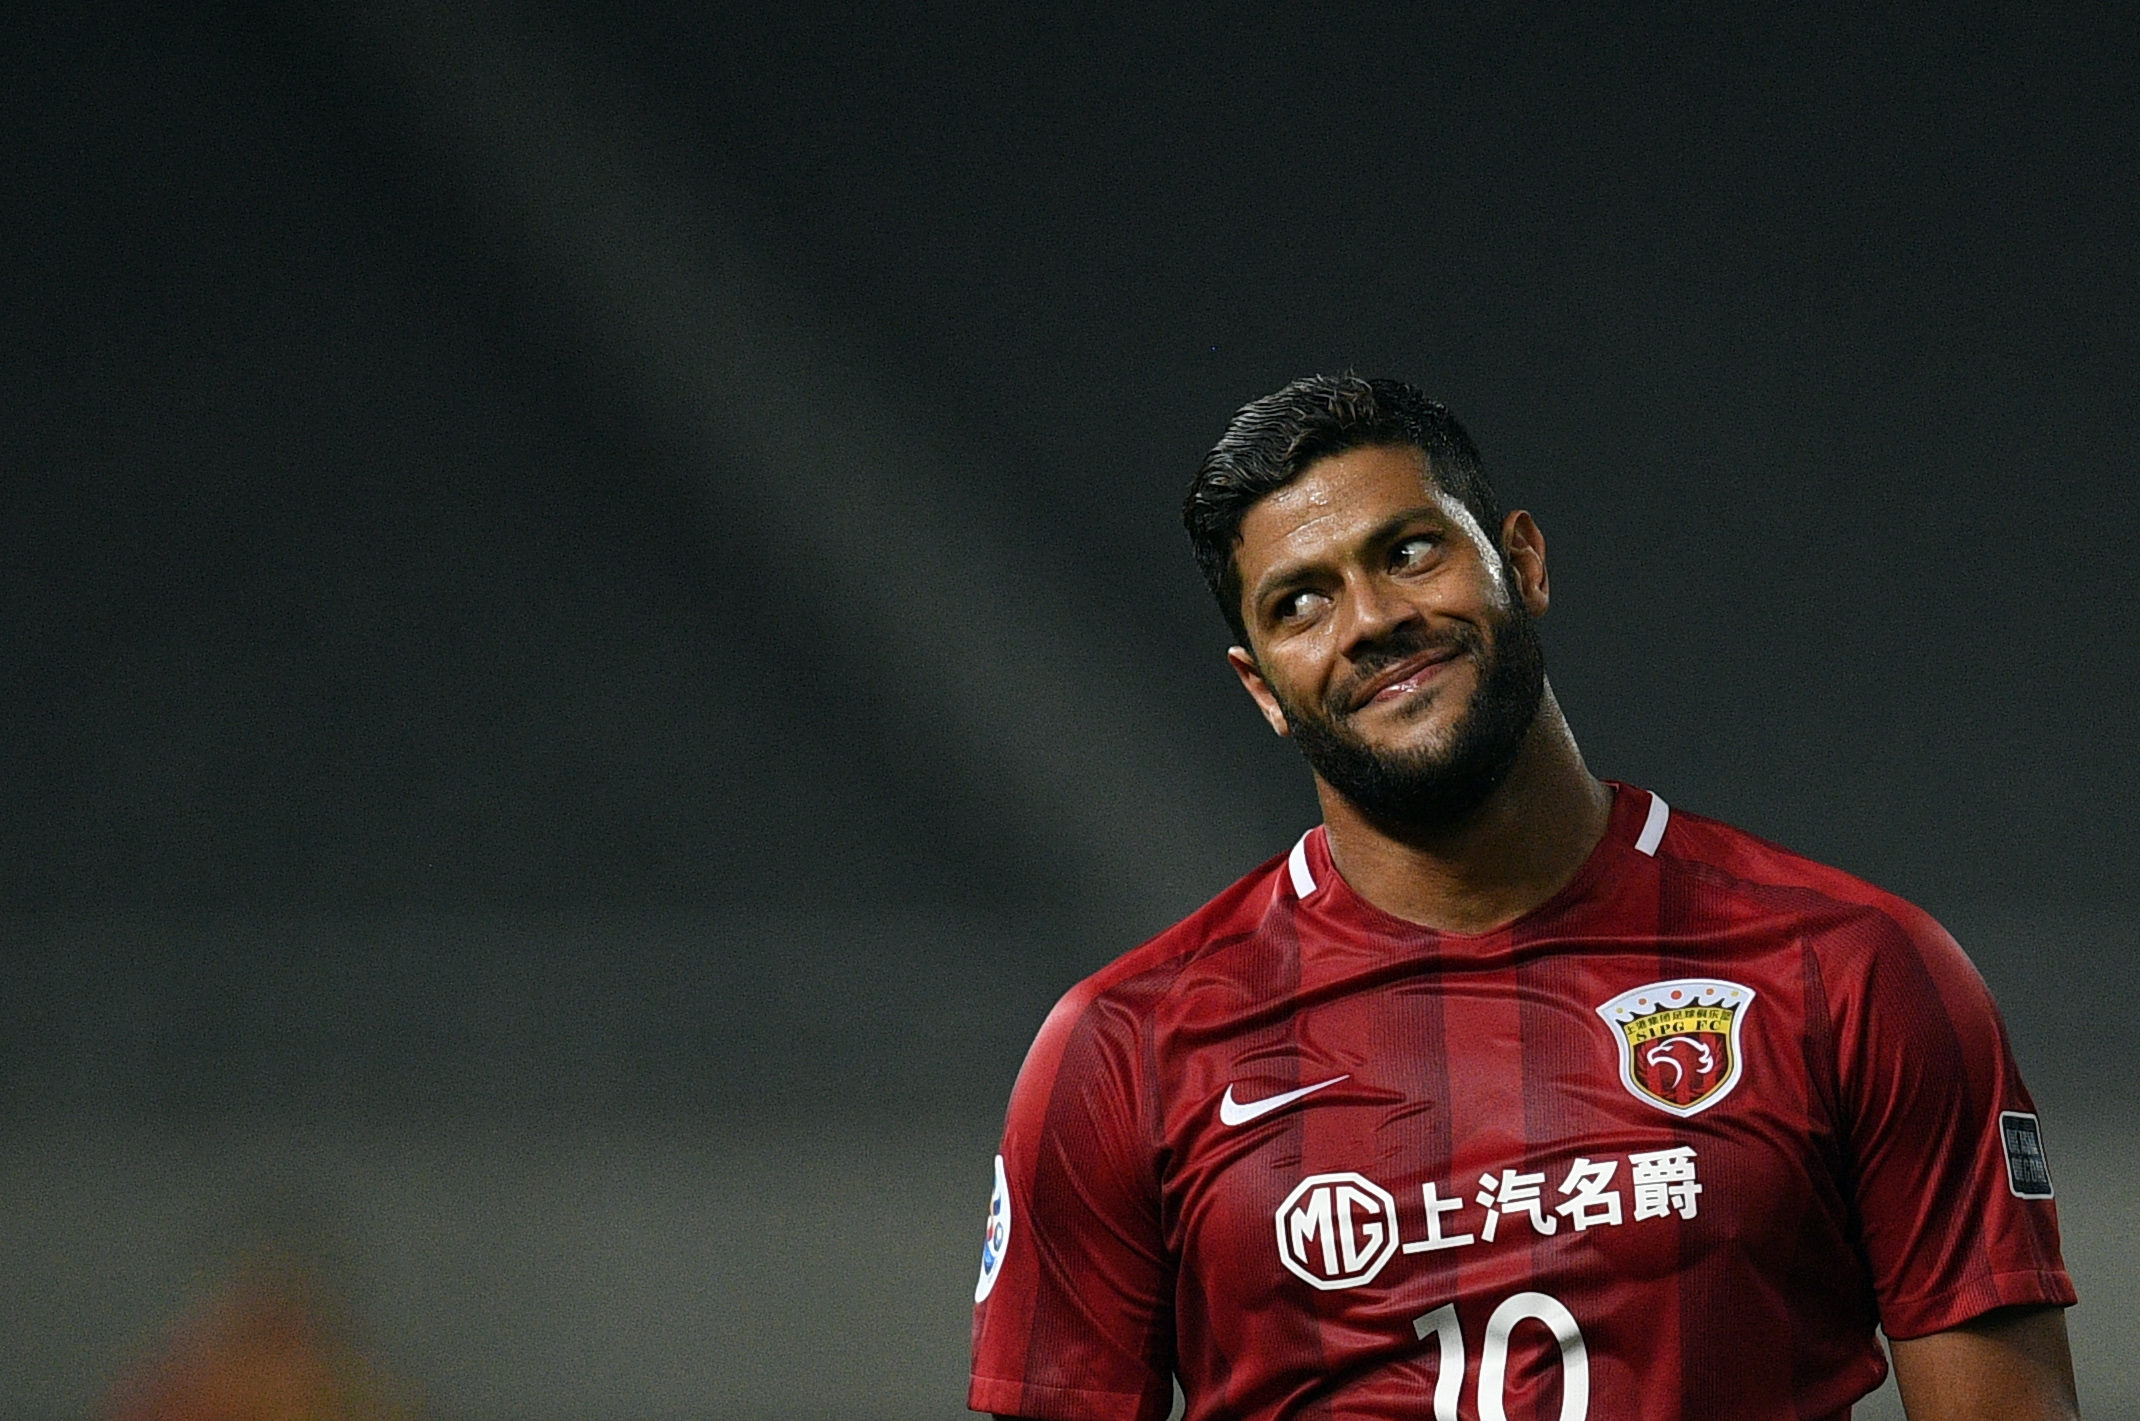 Shanghai SIPGBrazilian forward Hulk reacts during the AFC Asian Champions League group match between the Shanghai SIPG and South Koreas FC Seoul in Shanghai on April 26, 2017.  / AFP PHOTO / Johannes EISELE        (Photo credit should read JOHANNES EISELE/AFP/Getty Images)